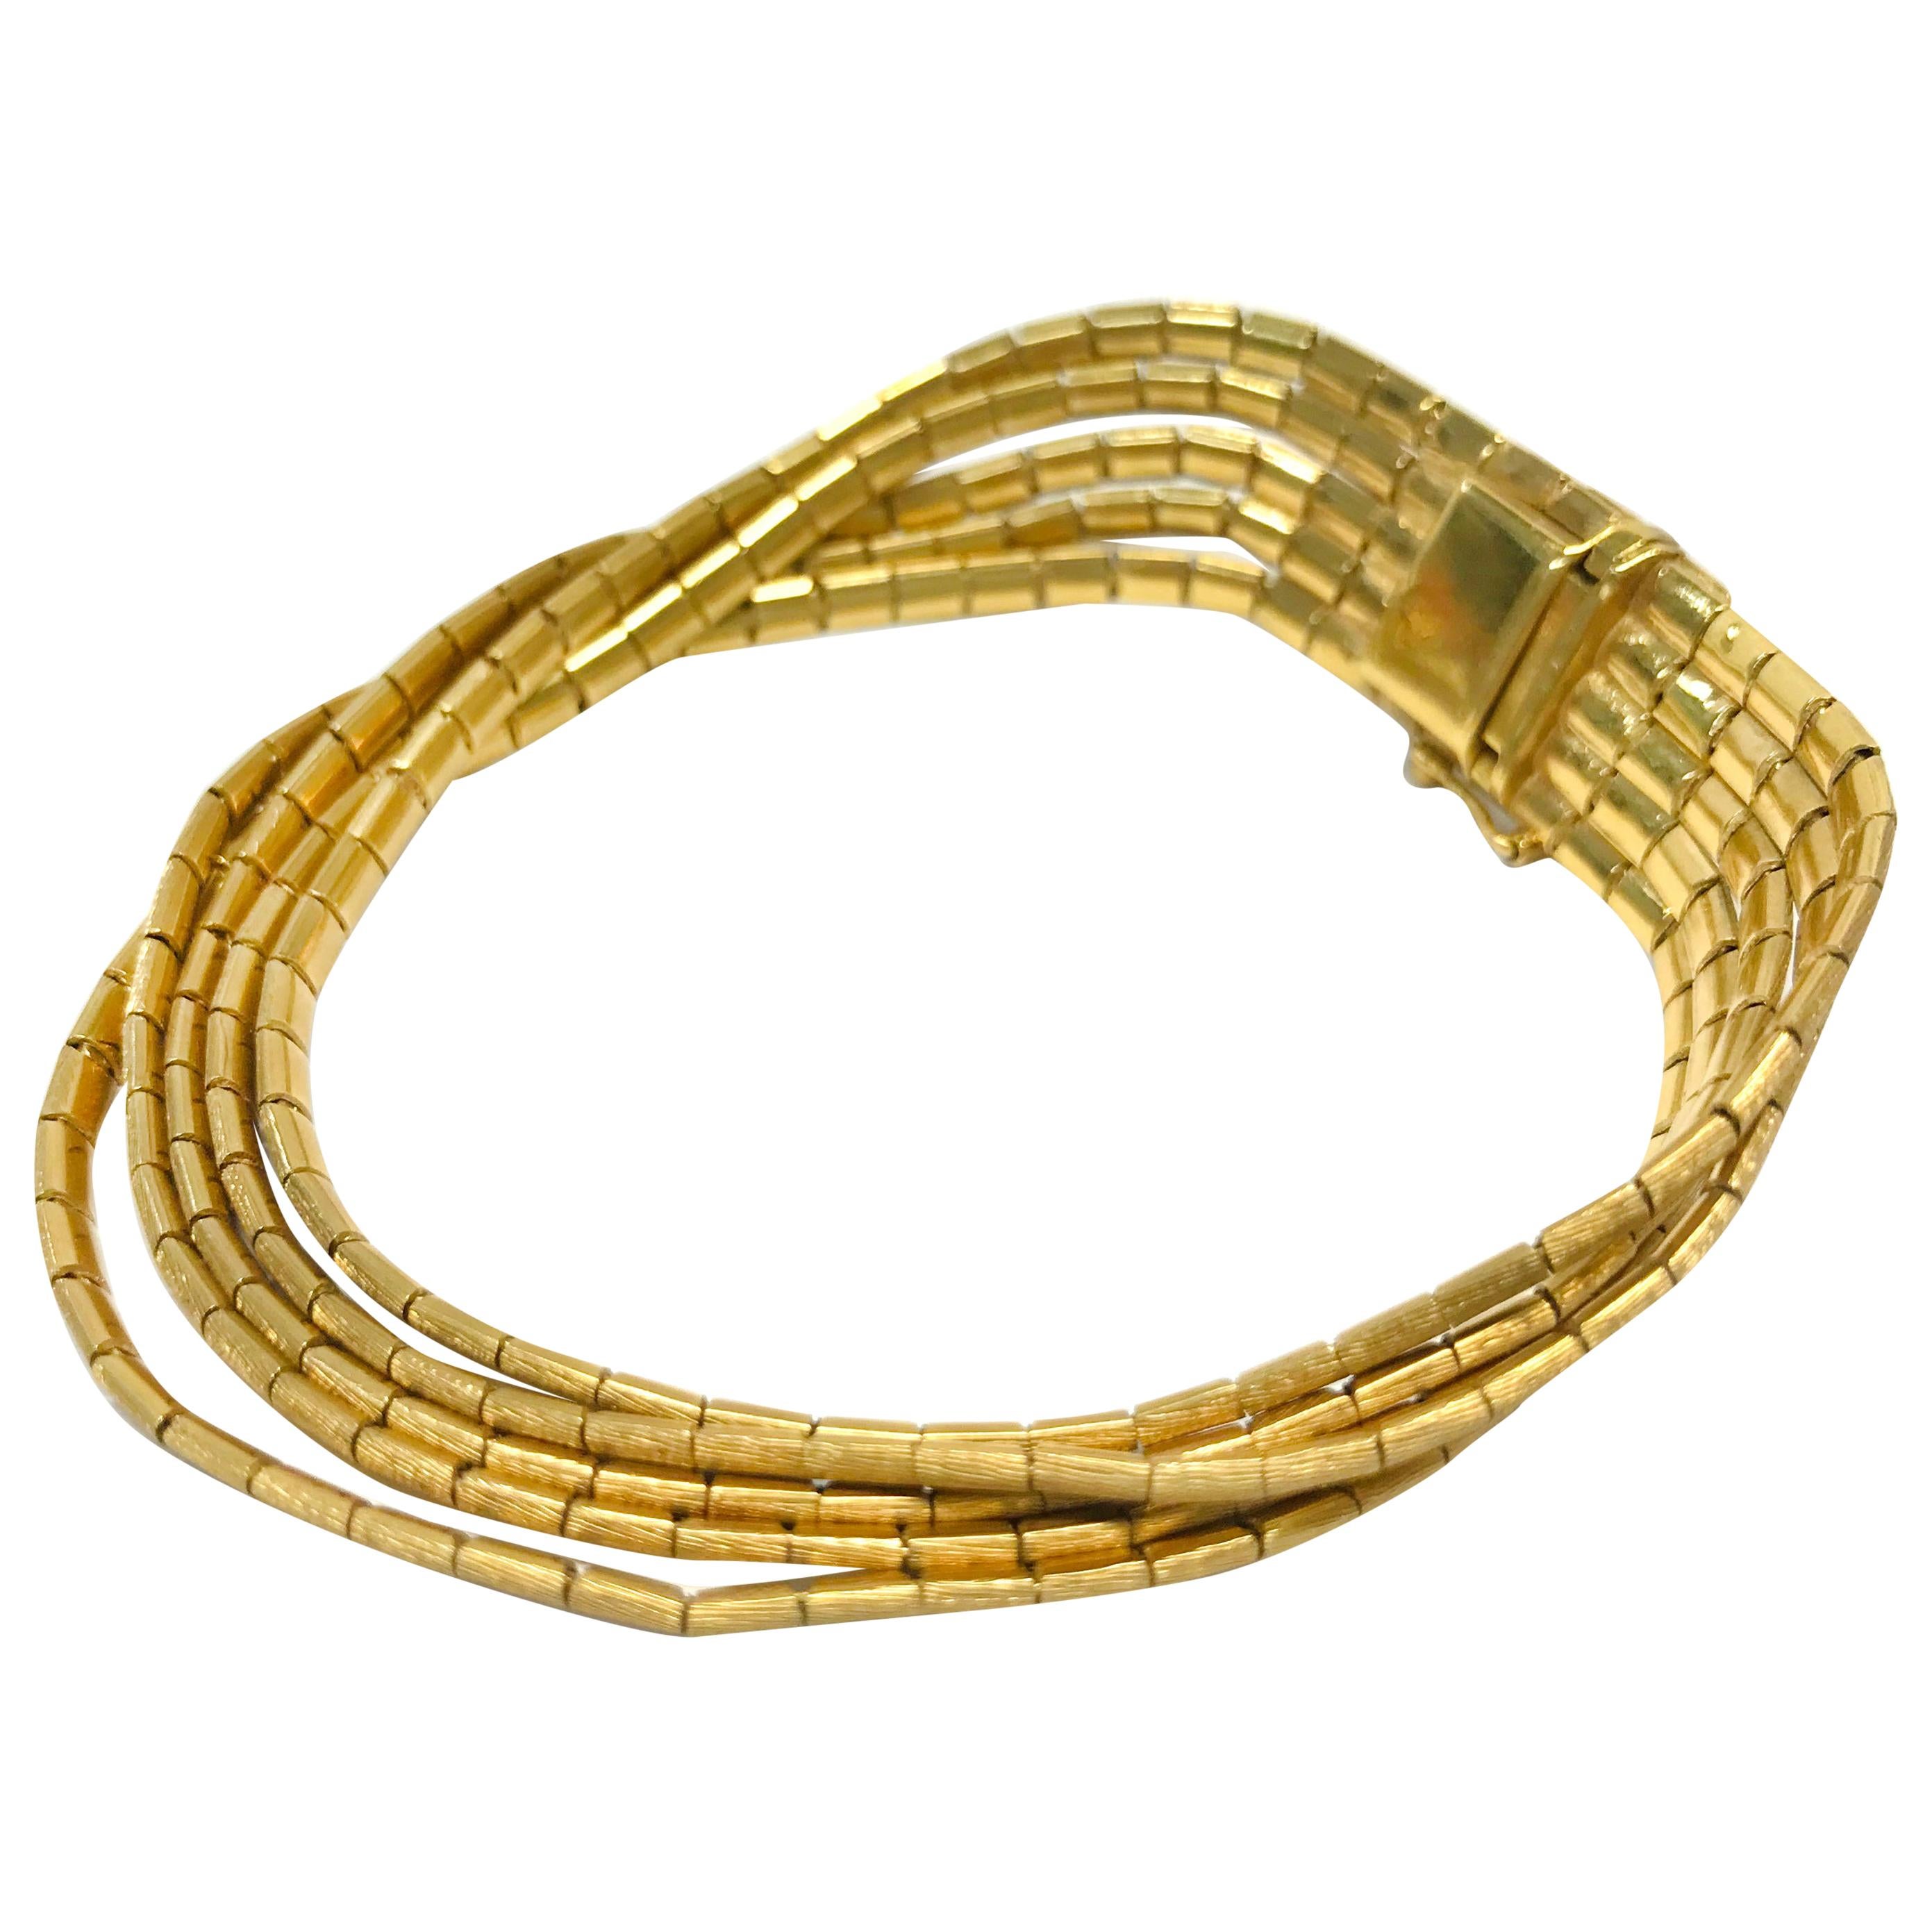 18 Karat Gold Vintage Five-Strand Bracelet. The bracelet features a large clasp that closes five strands of liquid-like gold threads, each is made from small rectangles. The top is Florentine finish and the underside is smooth. The bracelet is 0.52